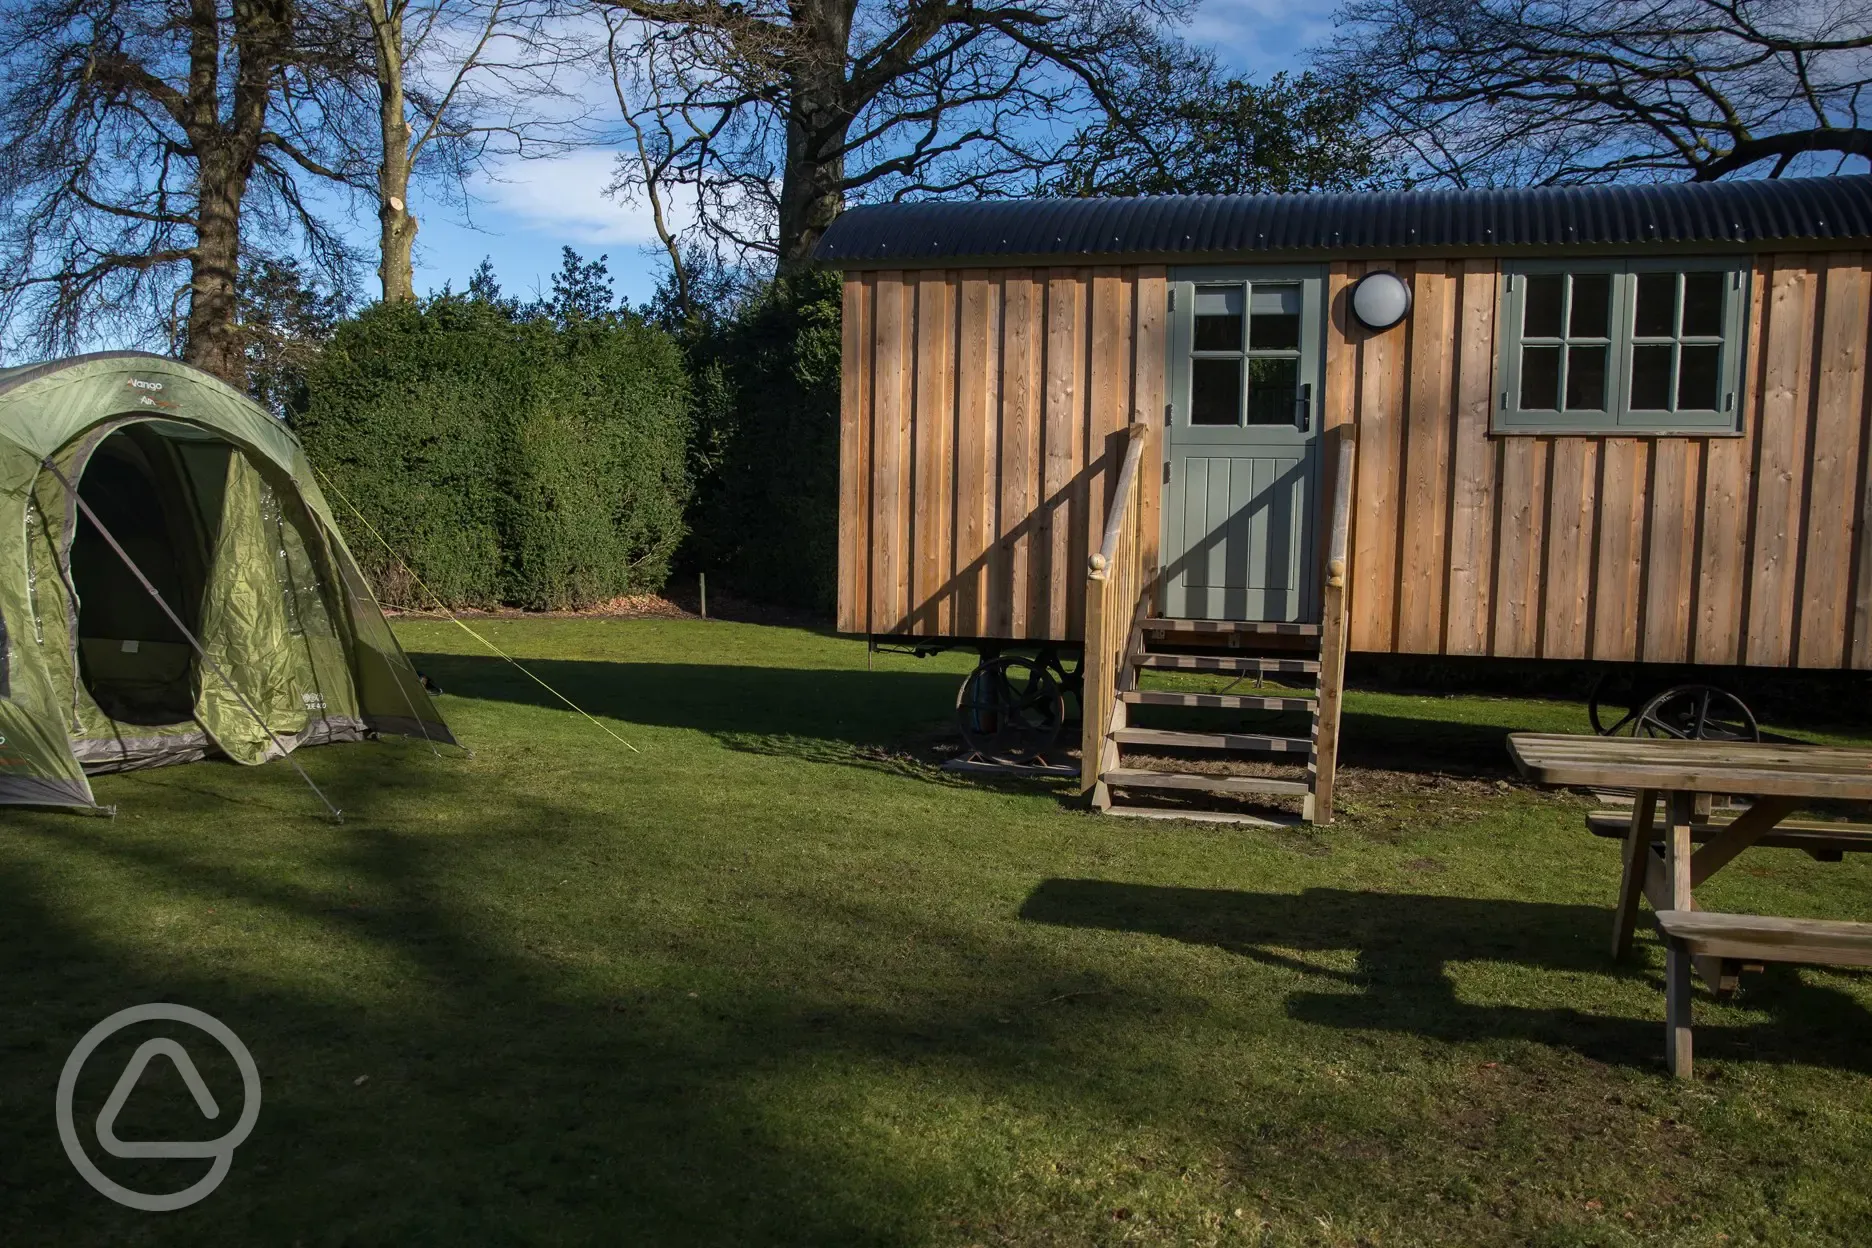 Shepherd's hut and tent pitch